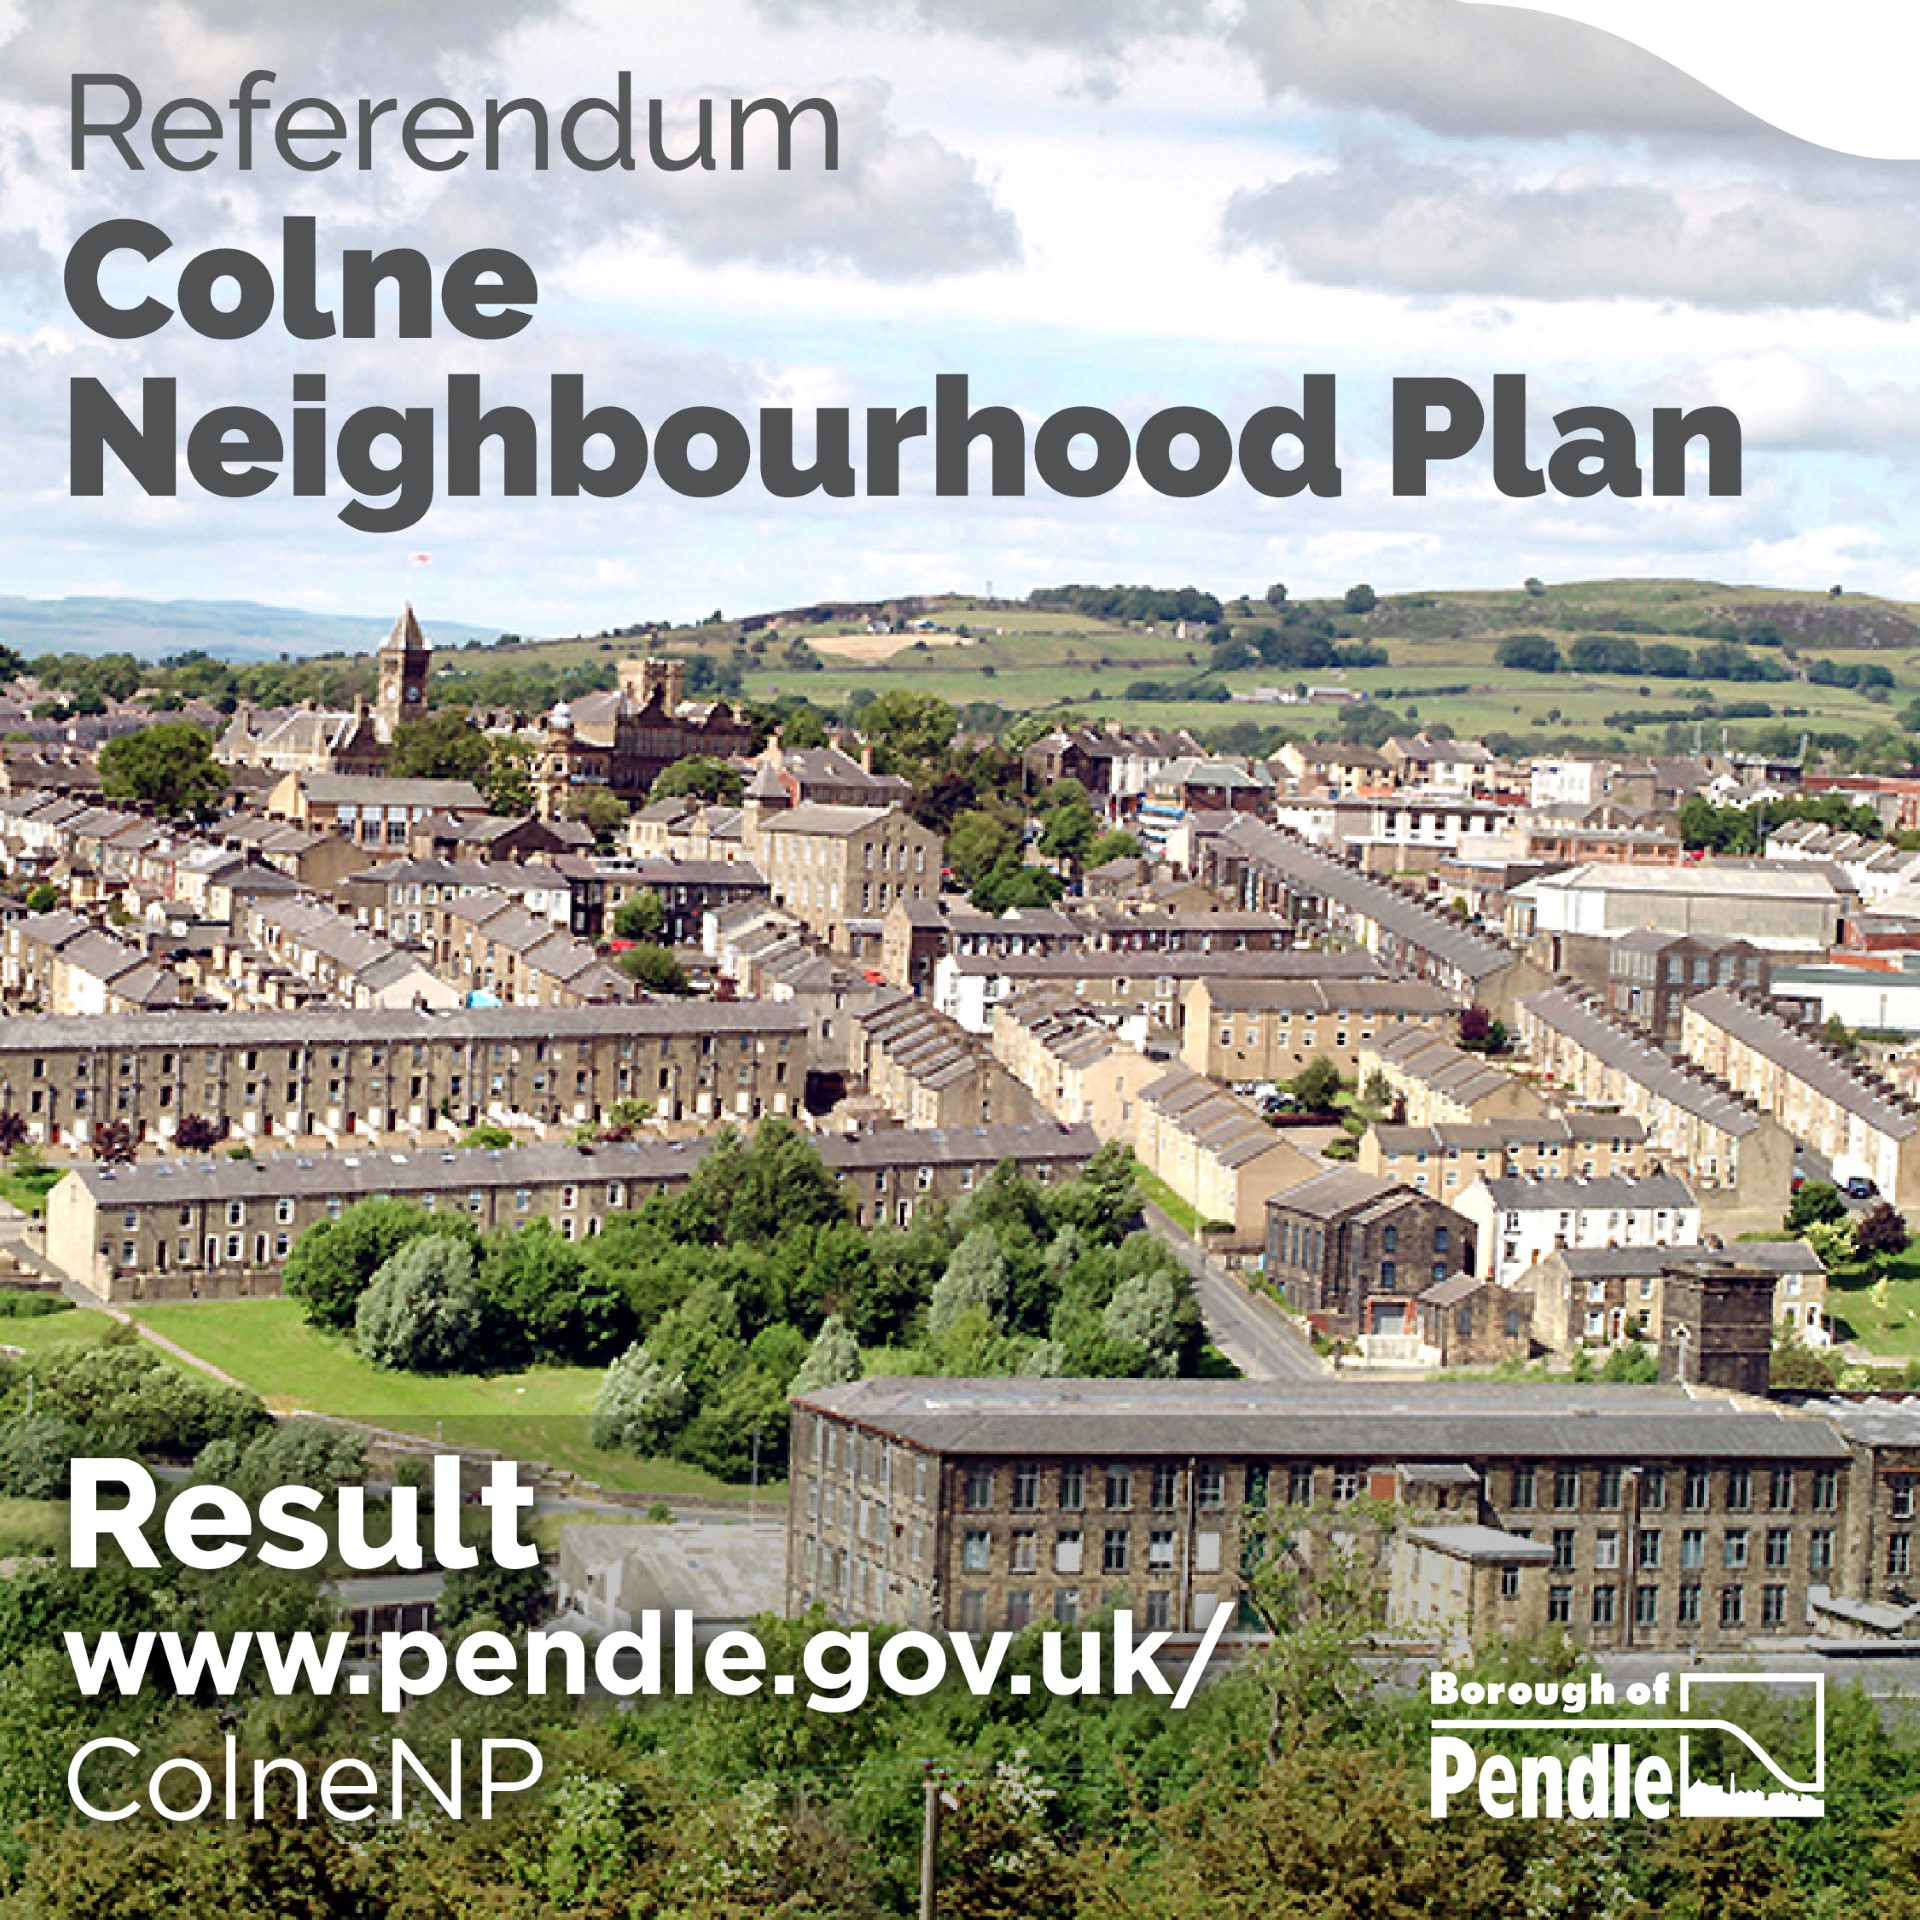 Colne residents voted to approve the Colne Neighbourhood Plan in a Referendum last week.